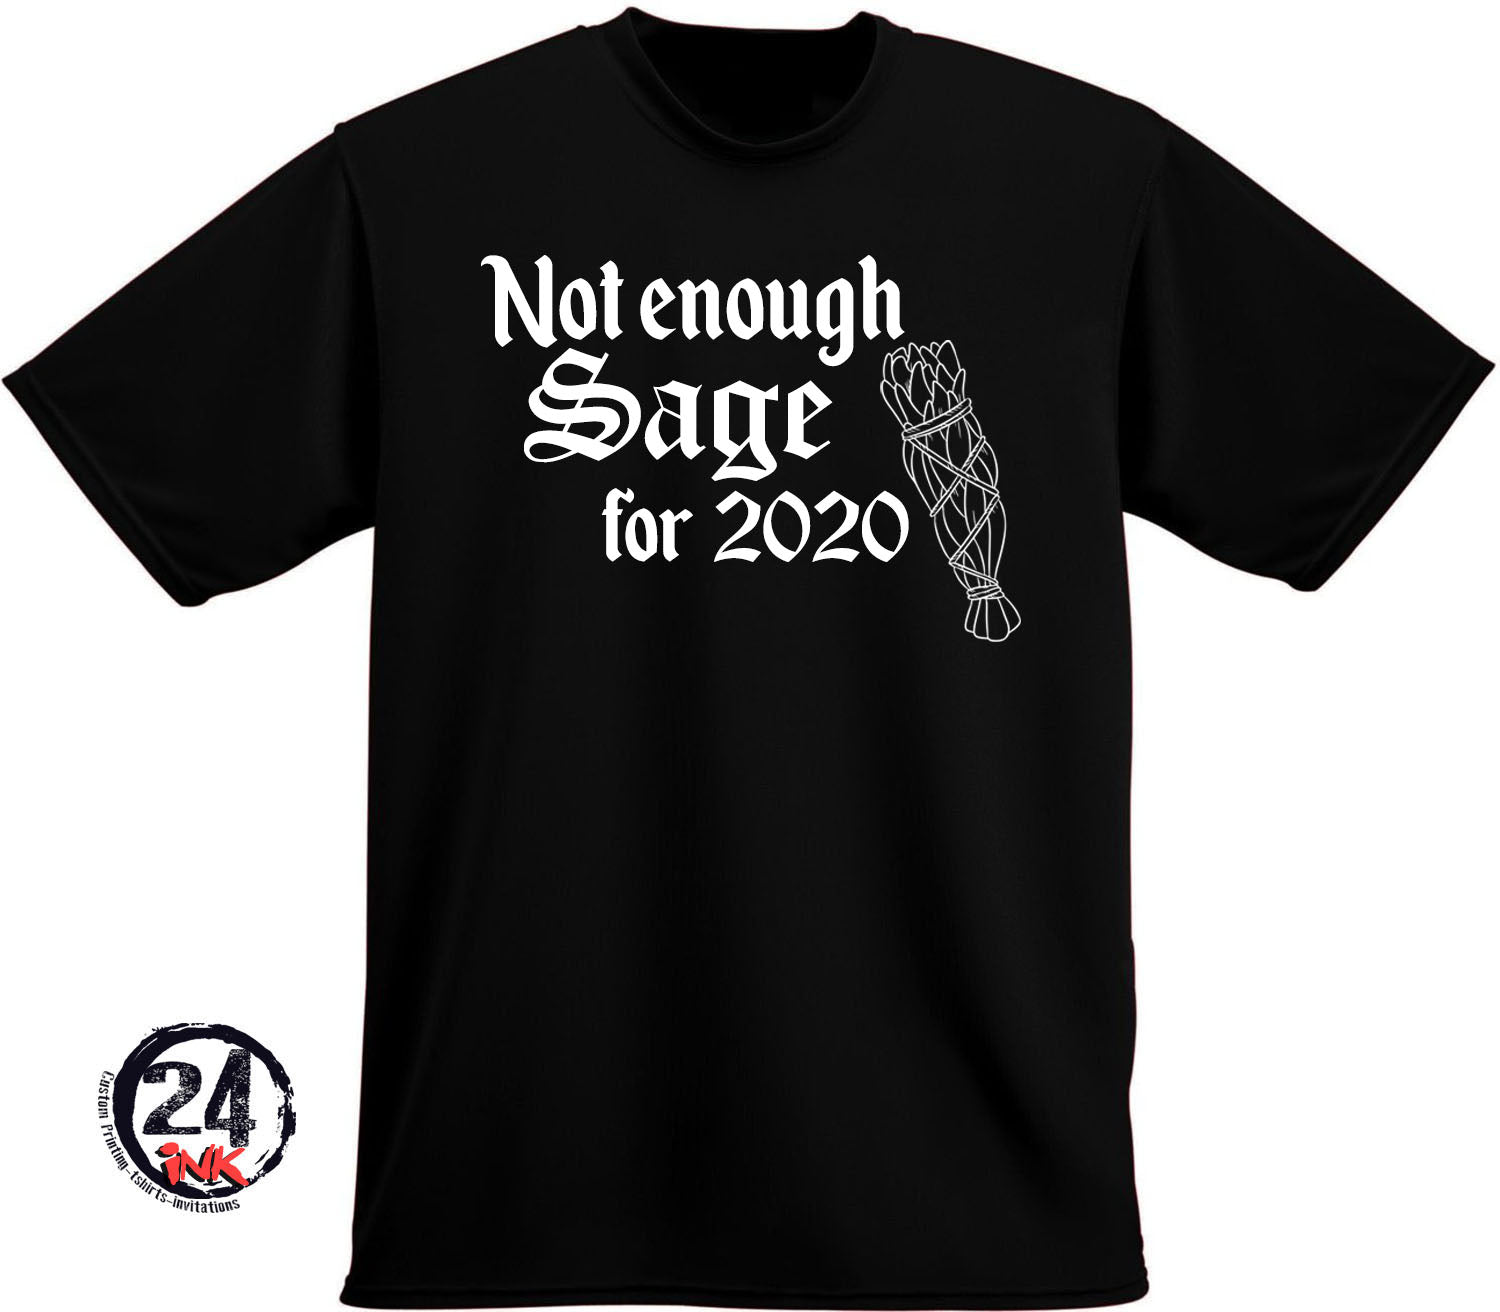 Not enough sage for 2020  T-Shirt